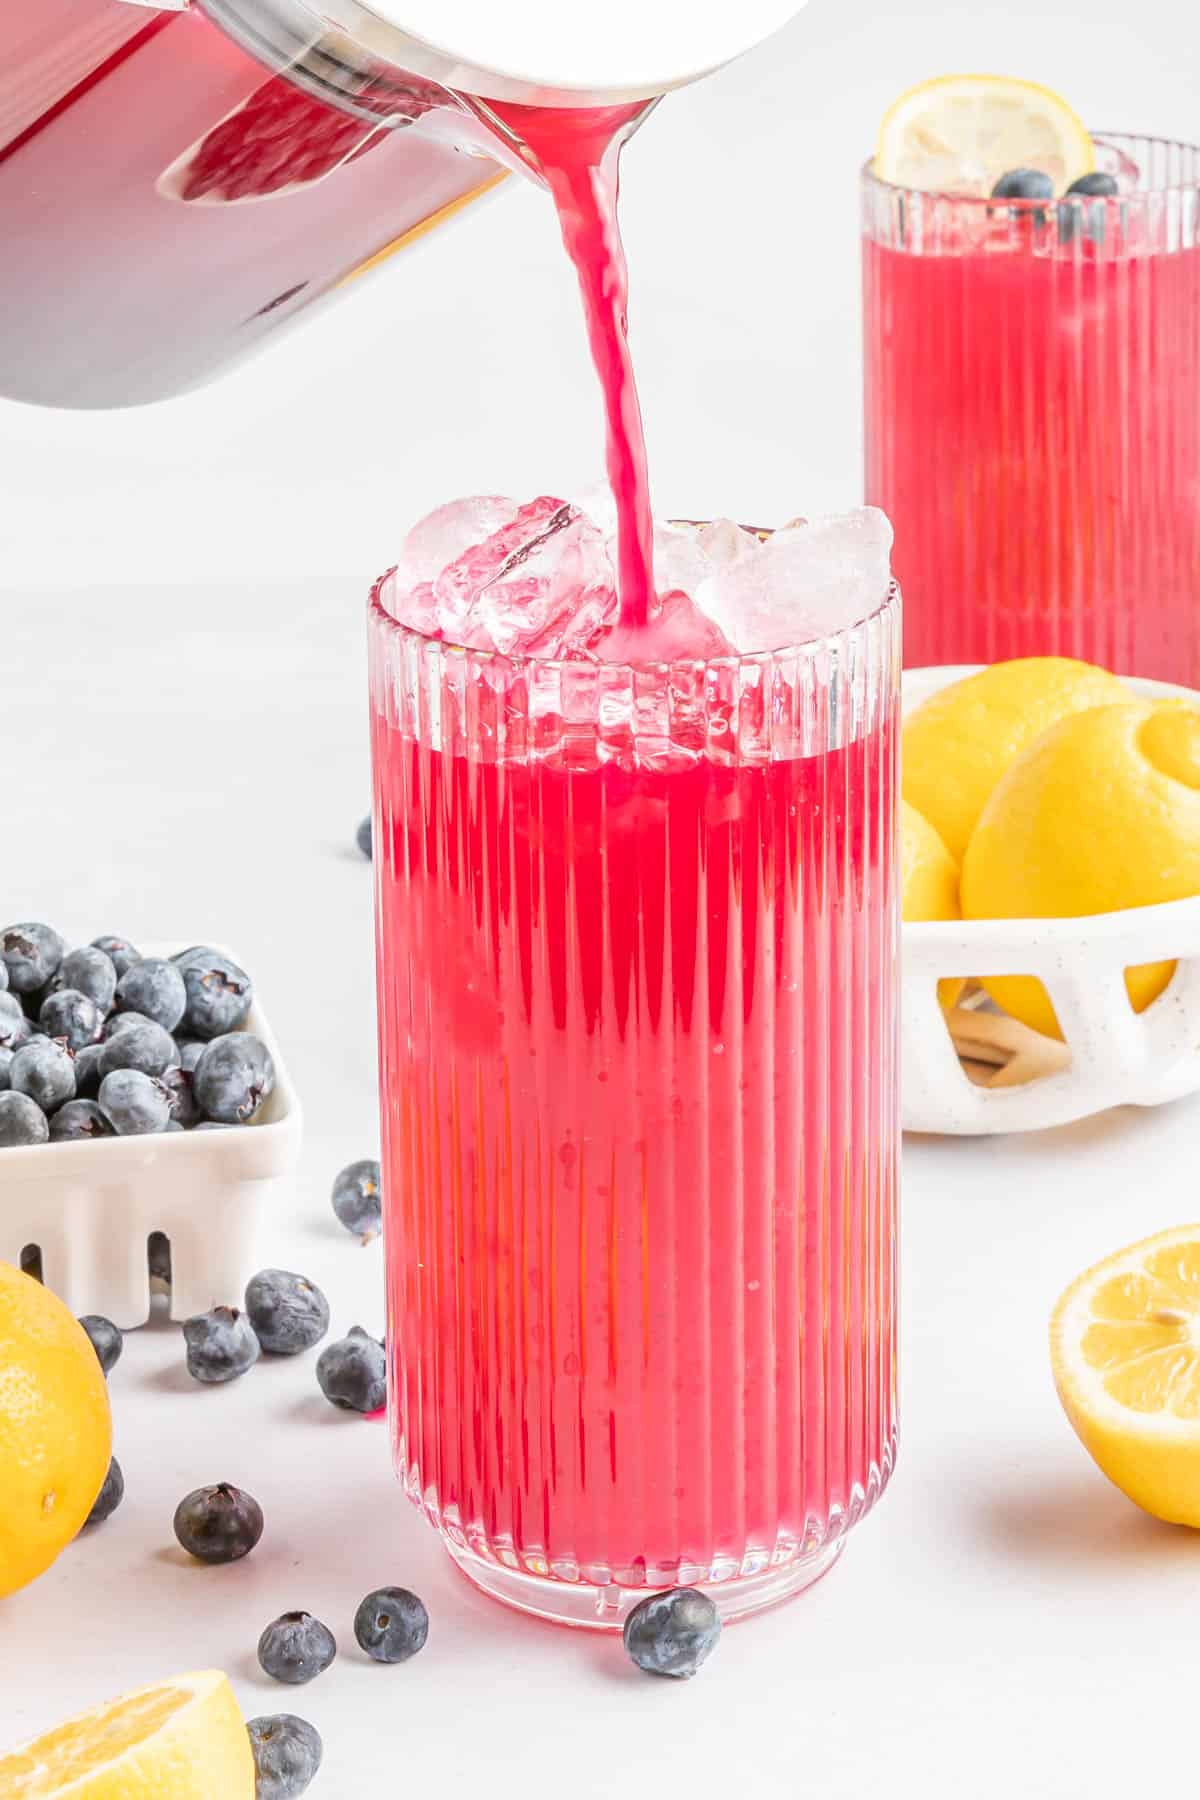 Blueberry lemonade being poured from a pitcher into a glass with ice.